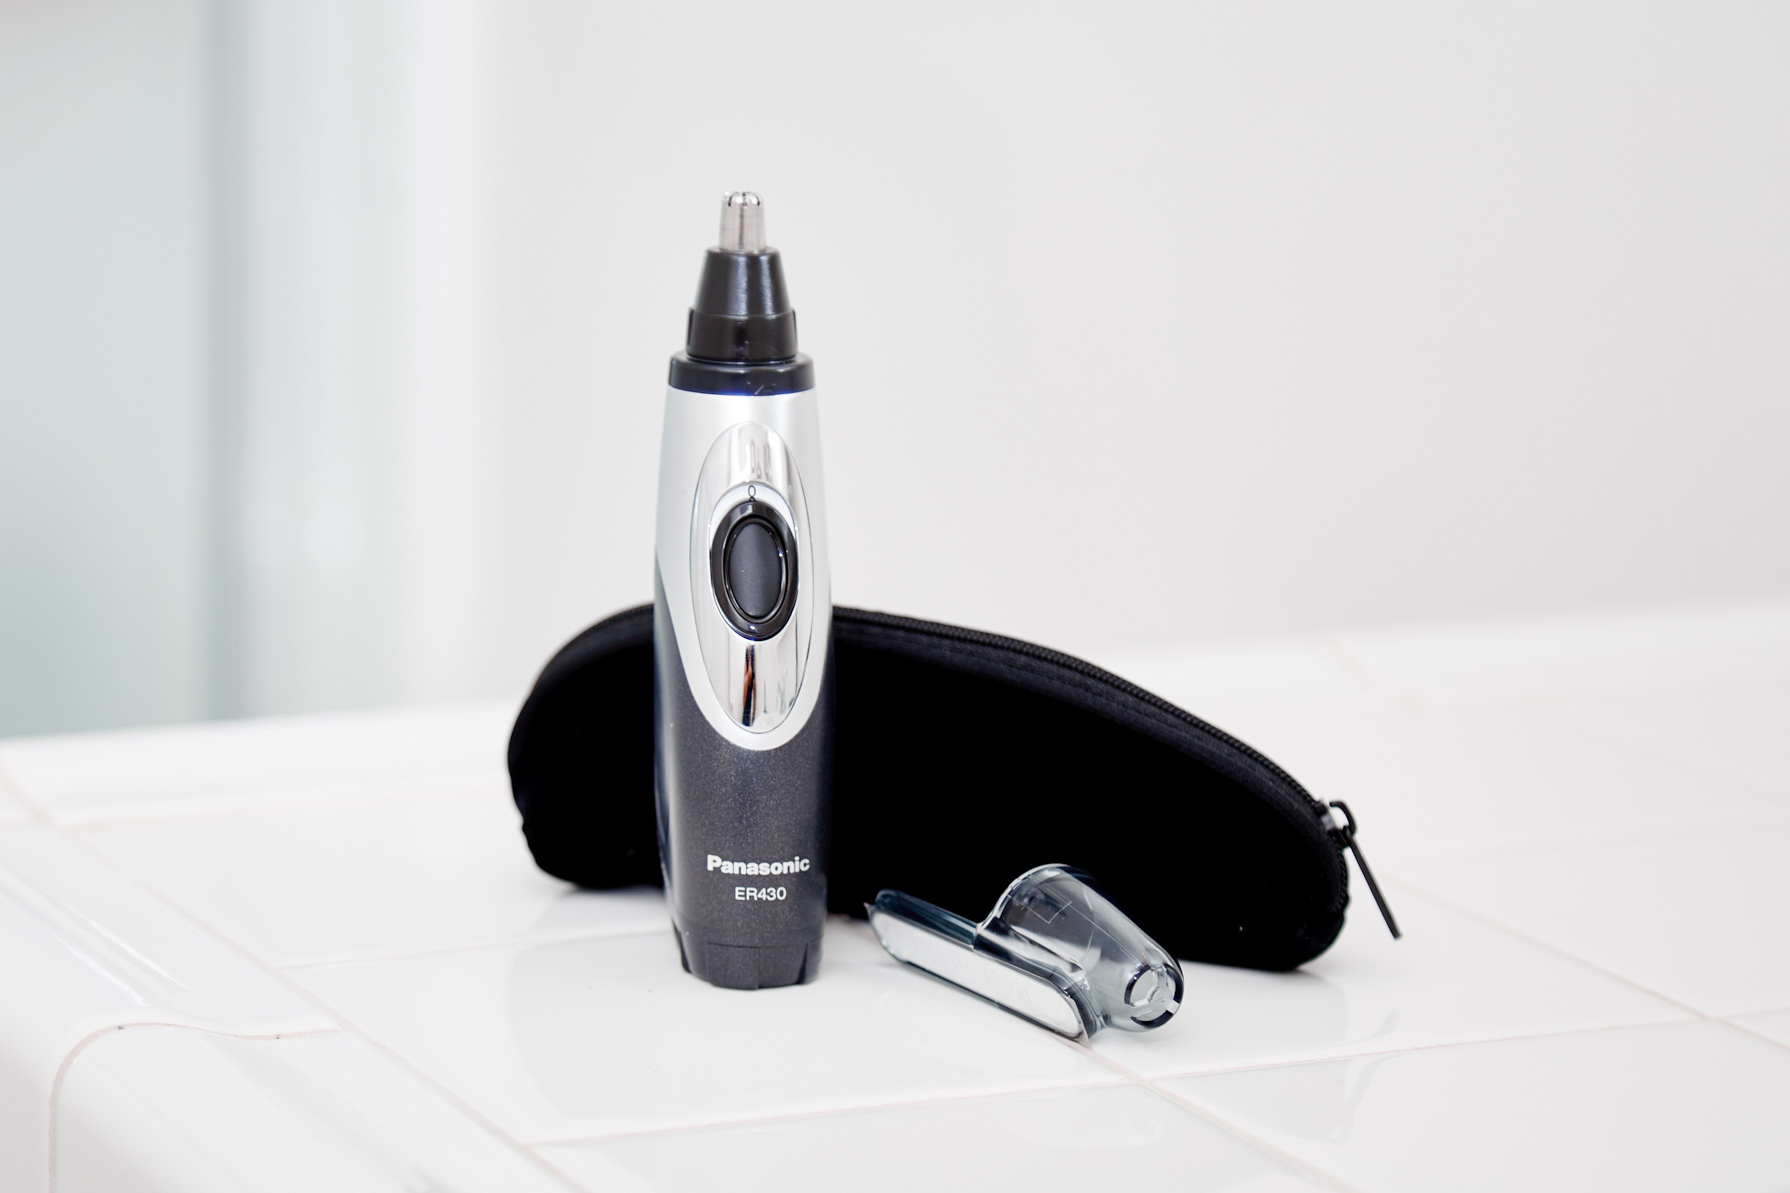 nose hair trimmer for ladies